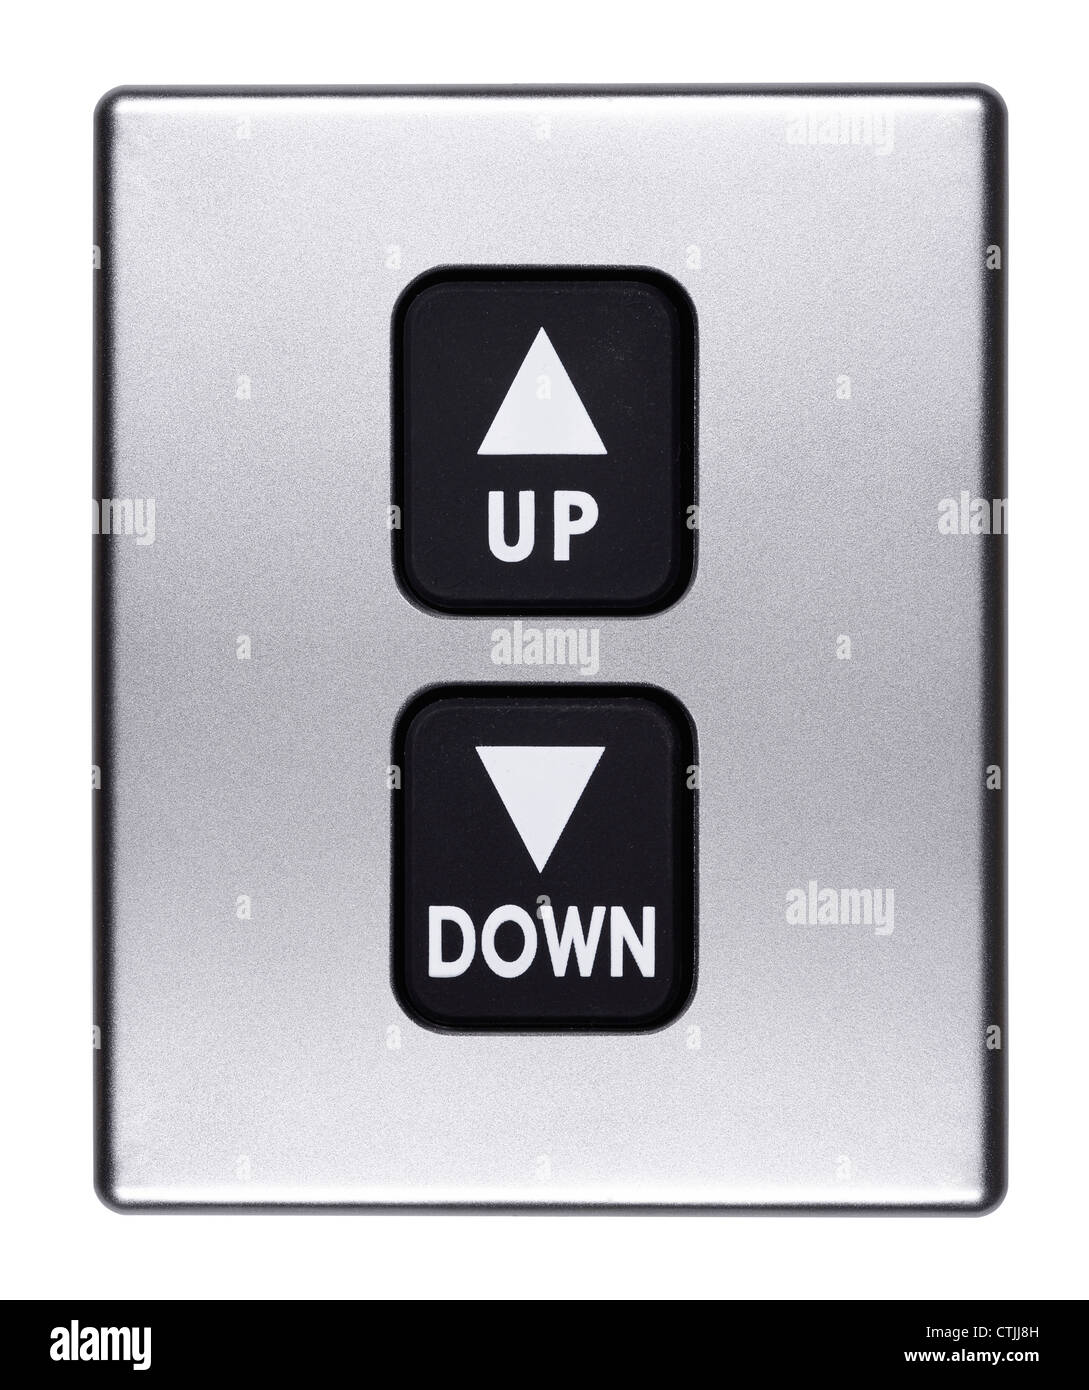 Up and Down buttons Stock Photo